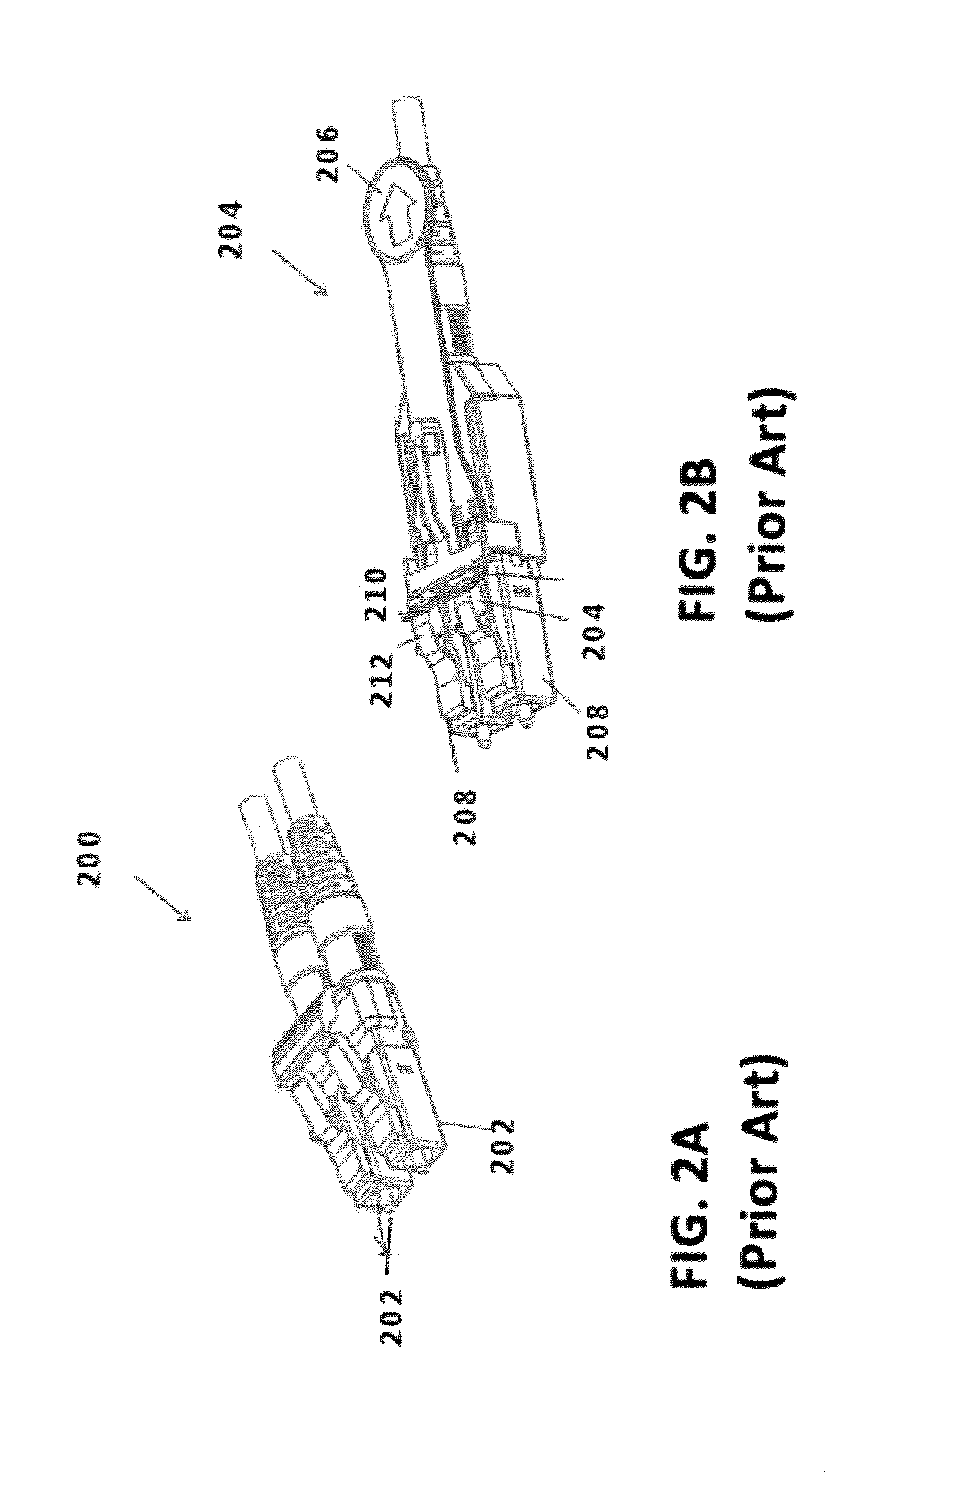 Ultra-small form factor optical connectors using a push-pull boot receptacle release